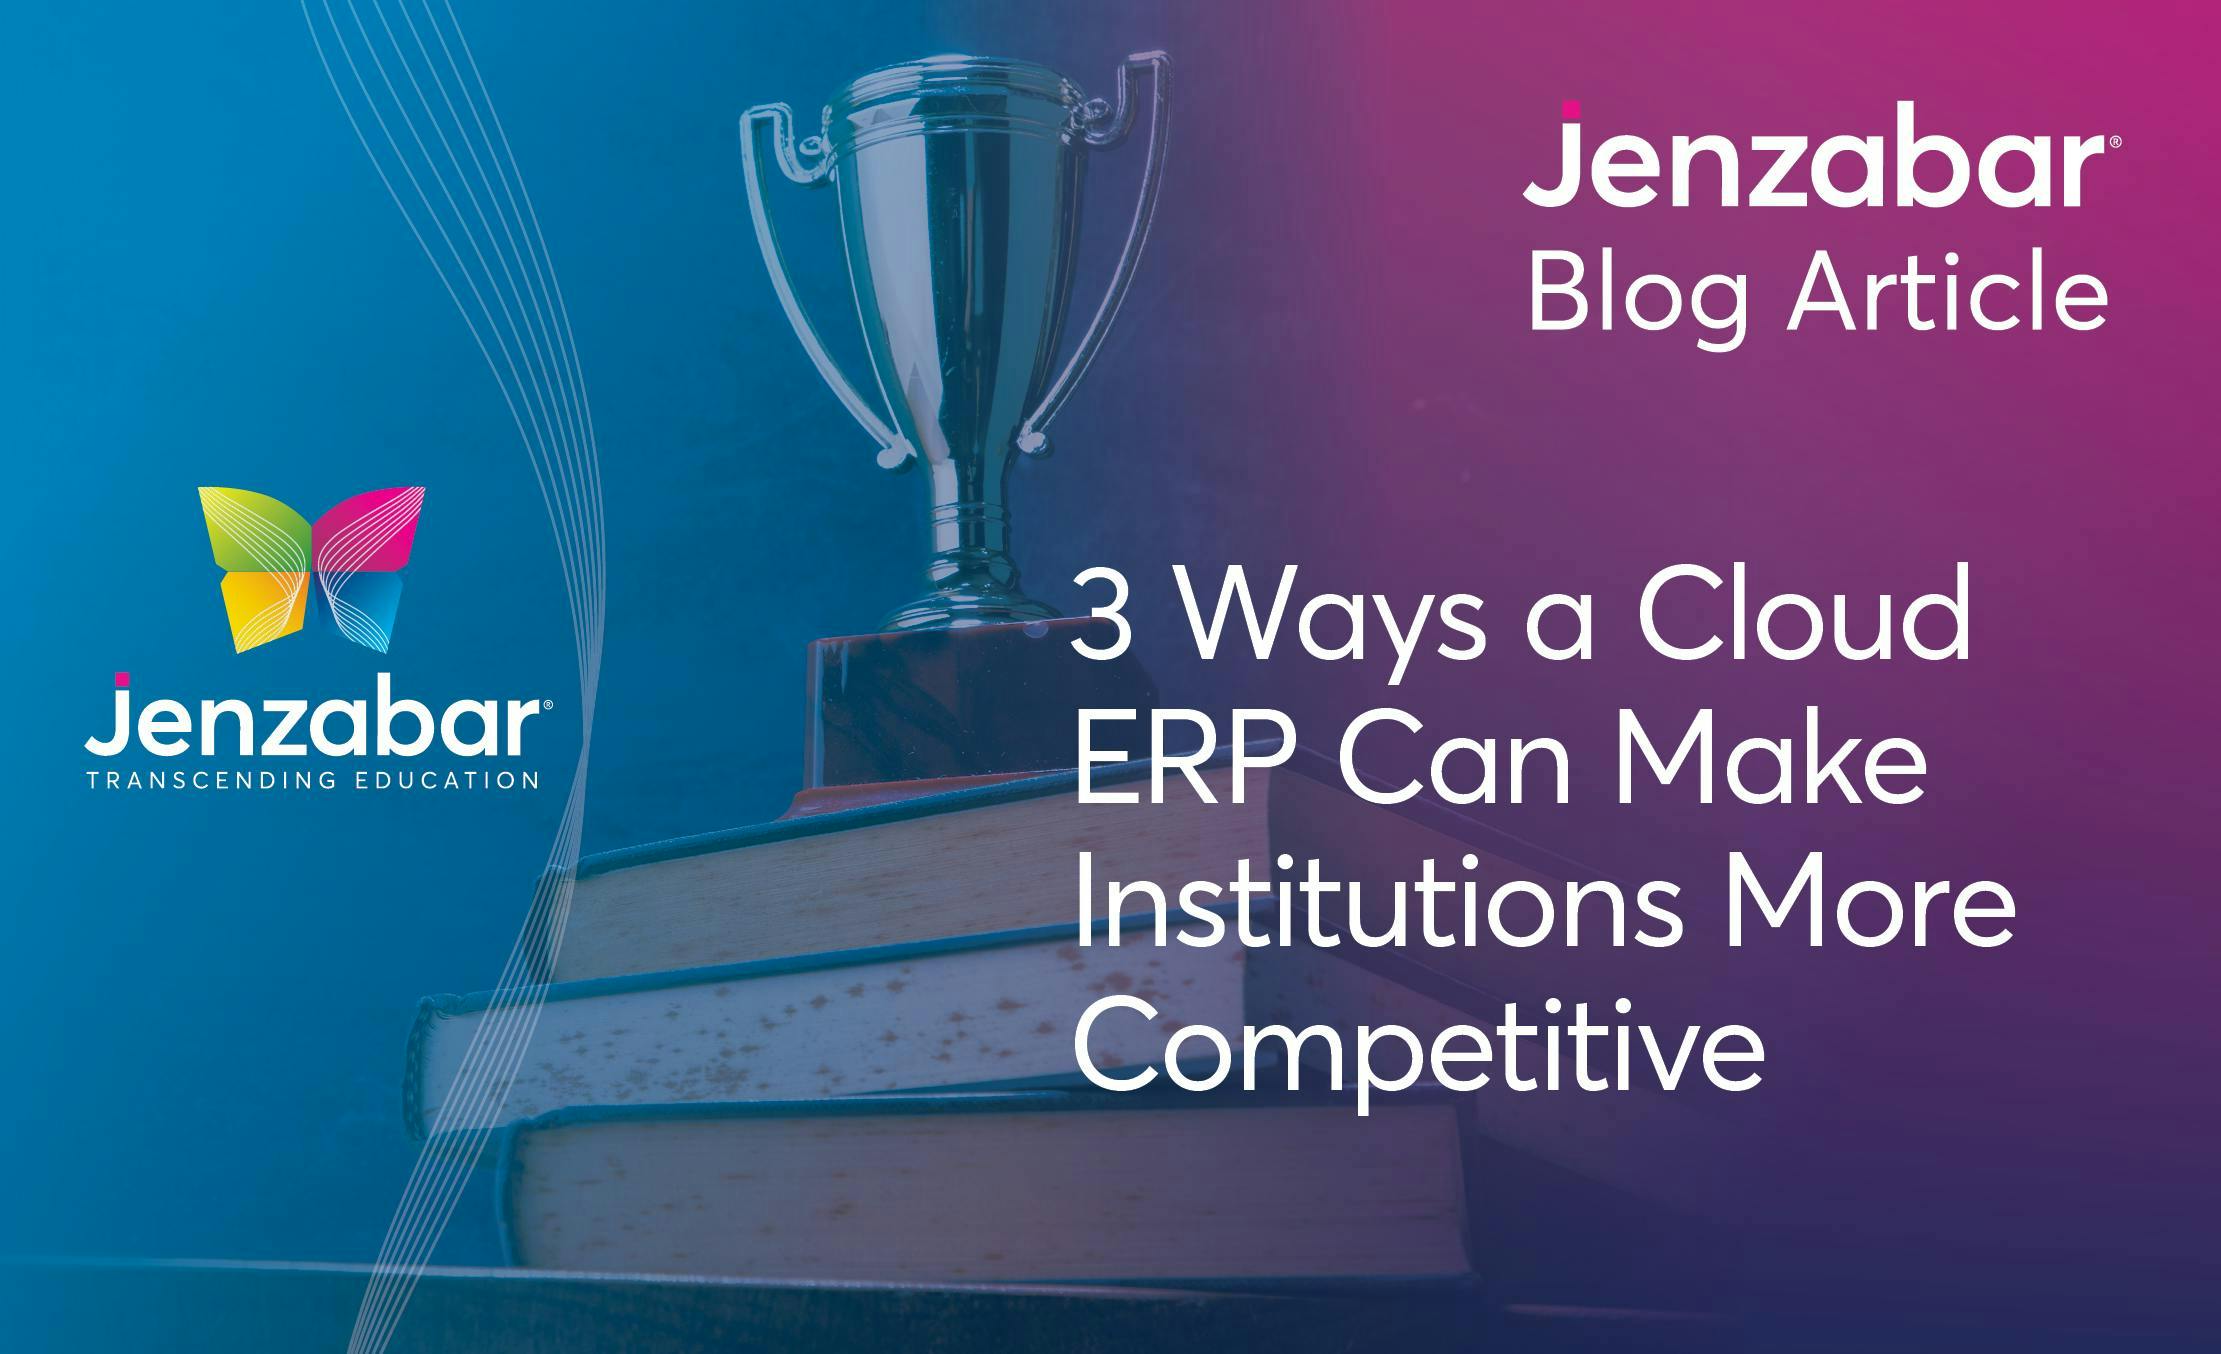 Blog: 3 Ways a Cloud ERP Can Make Institutions More Competitive